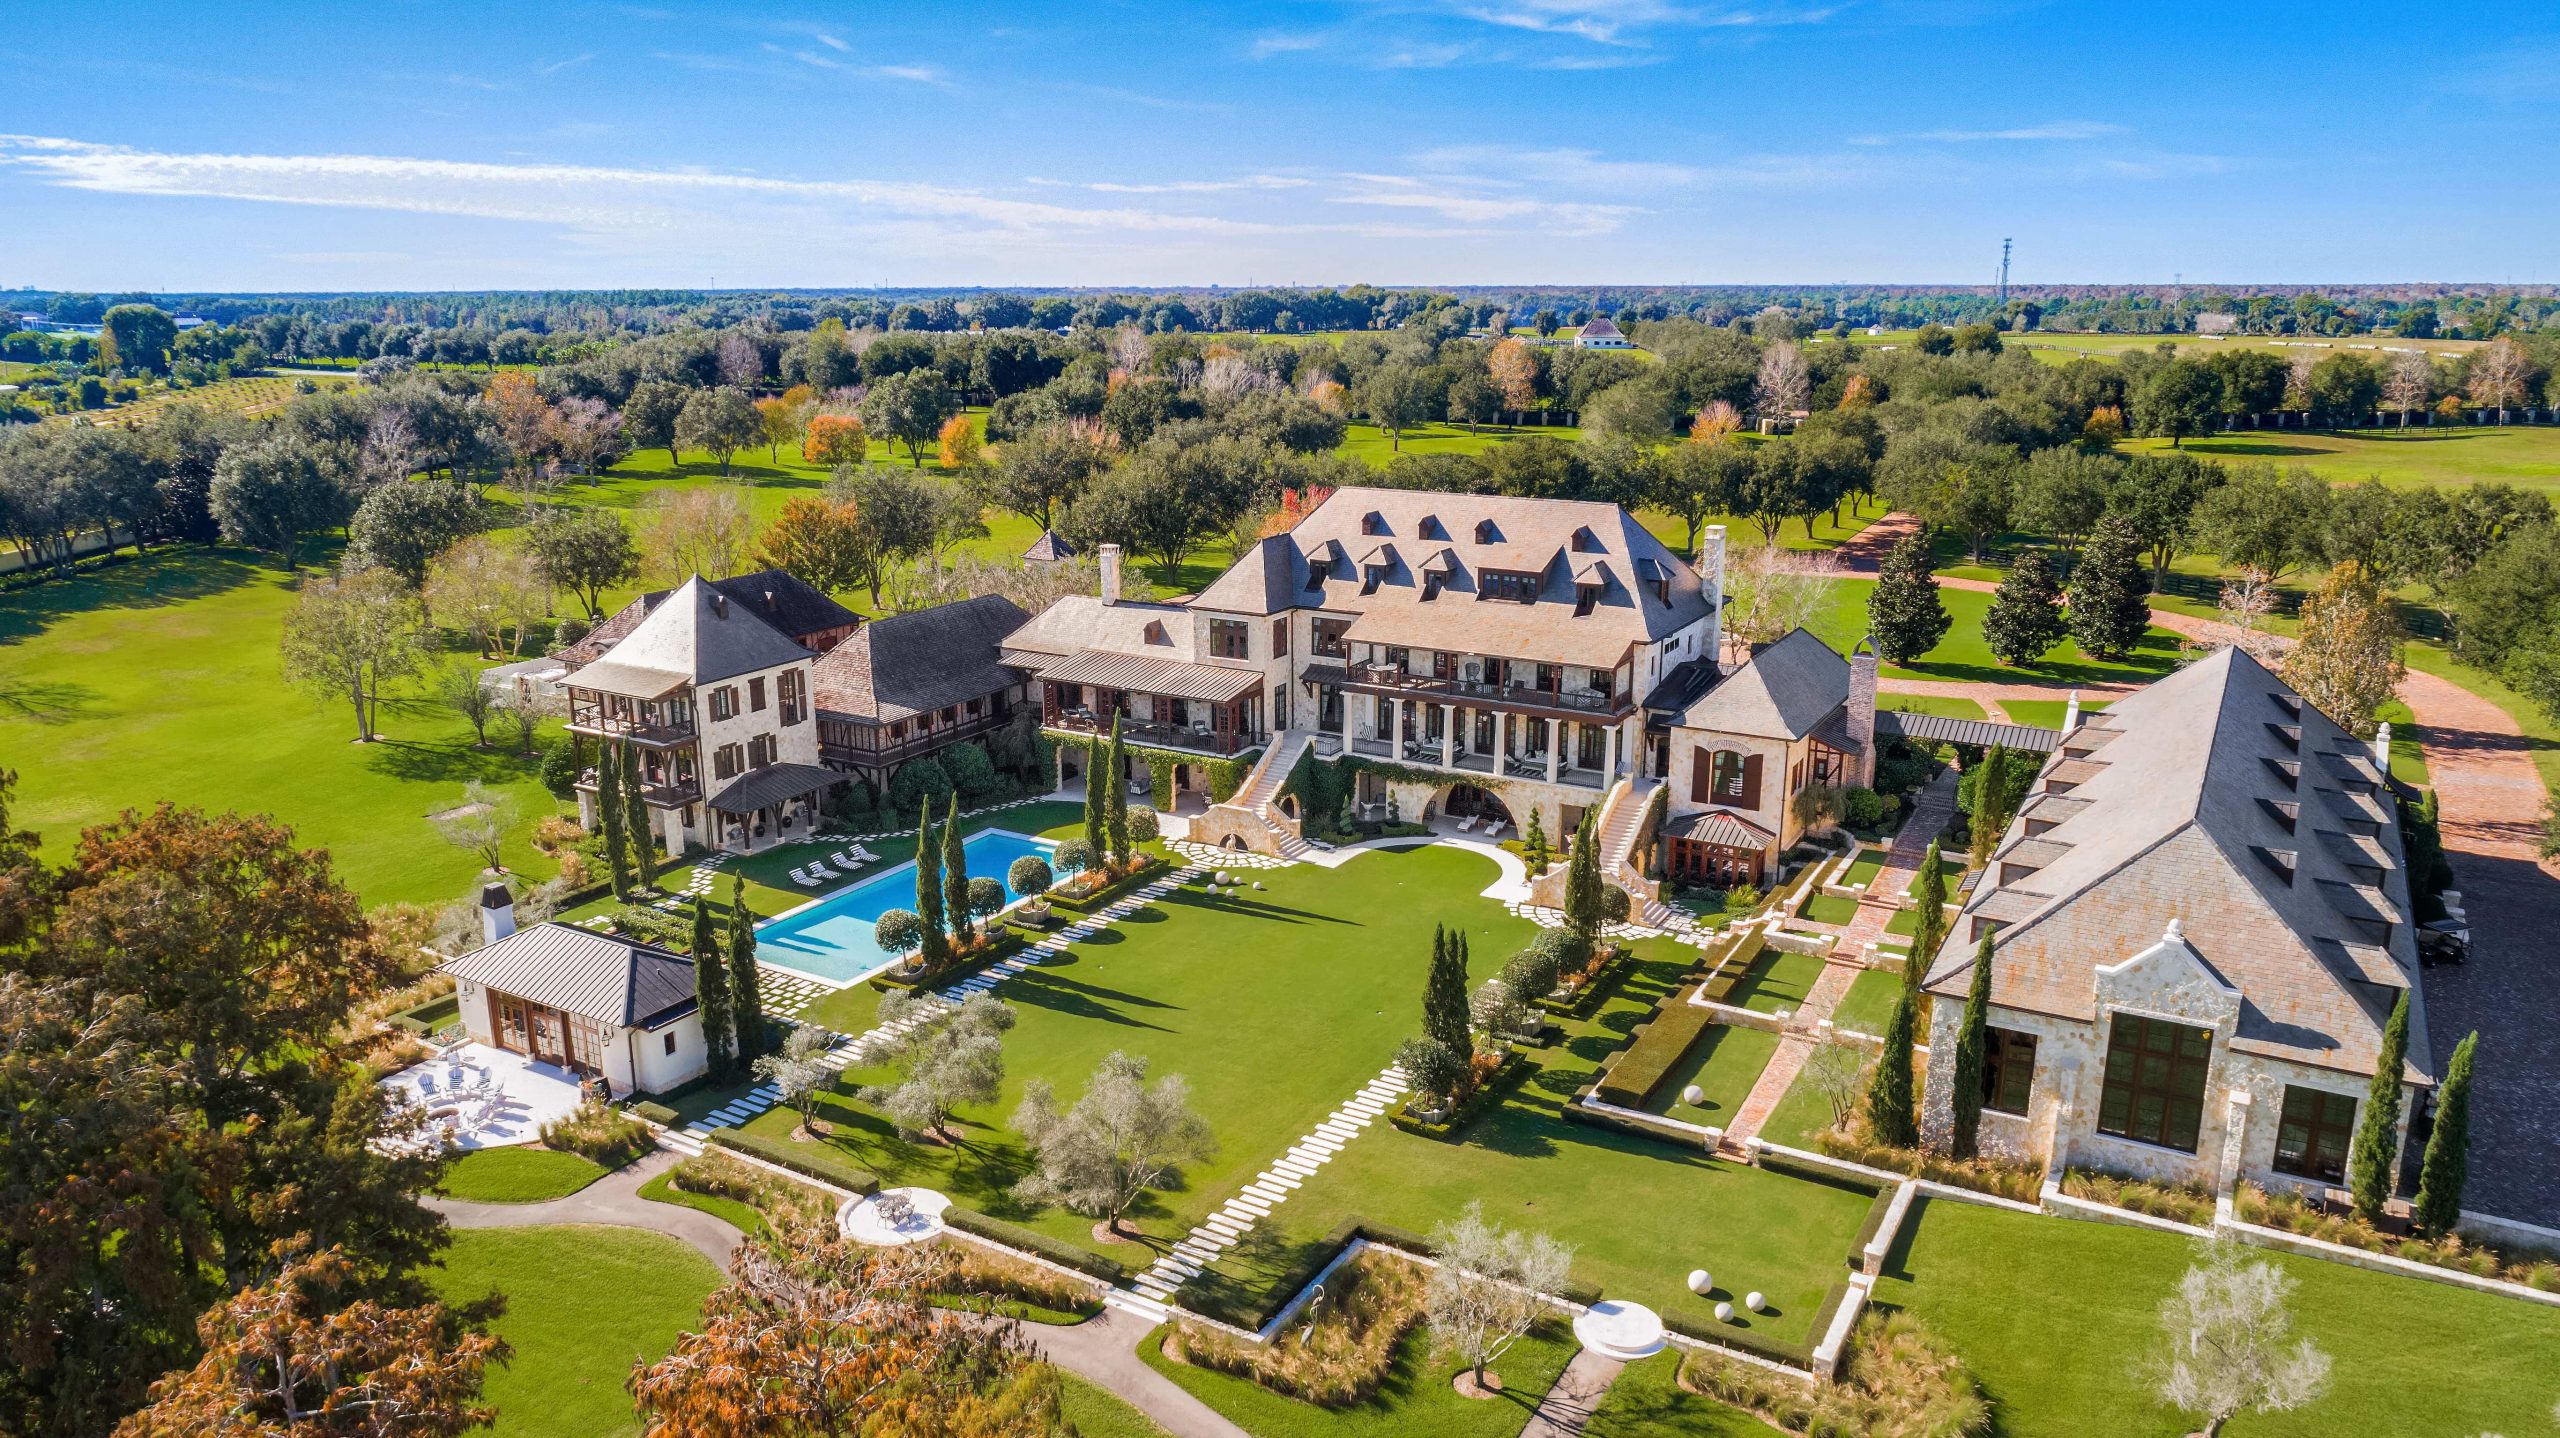 areal view of the oaks estate and backyard